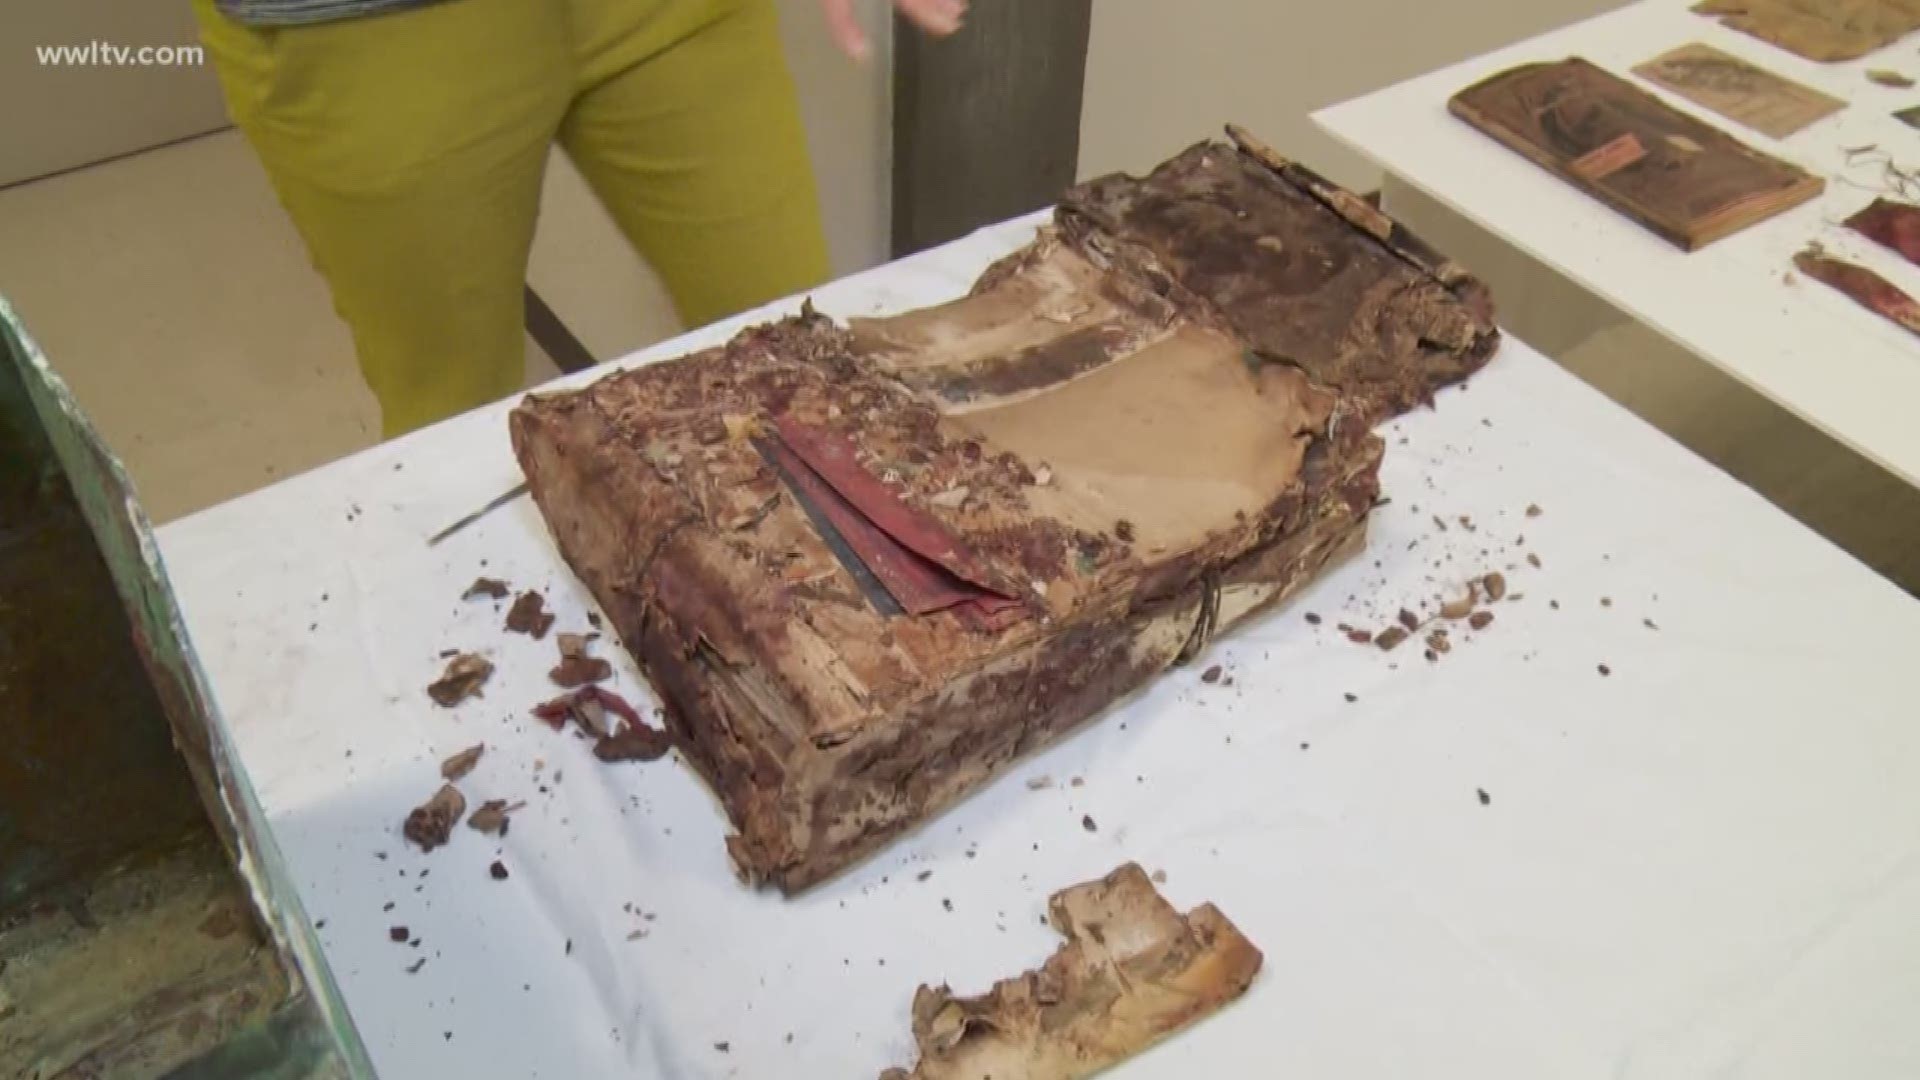 Curators with the Louisiana State Museum gave the media a closer look at a time capsule's contents.